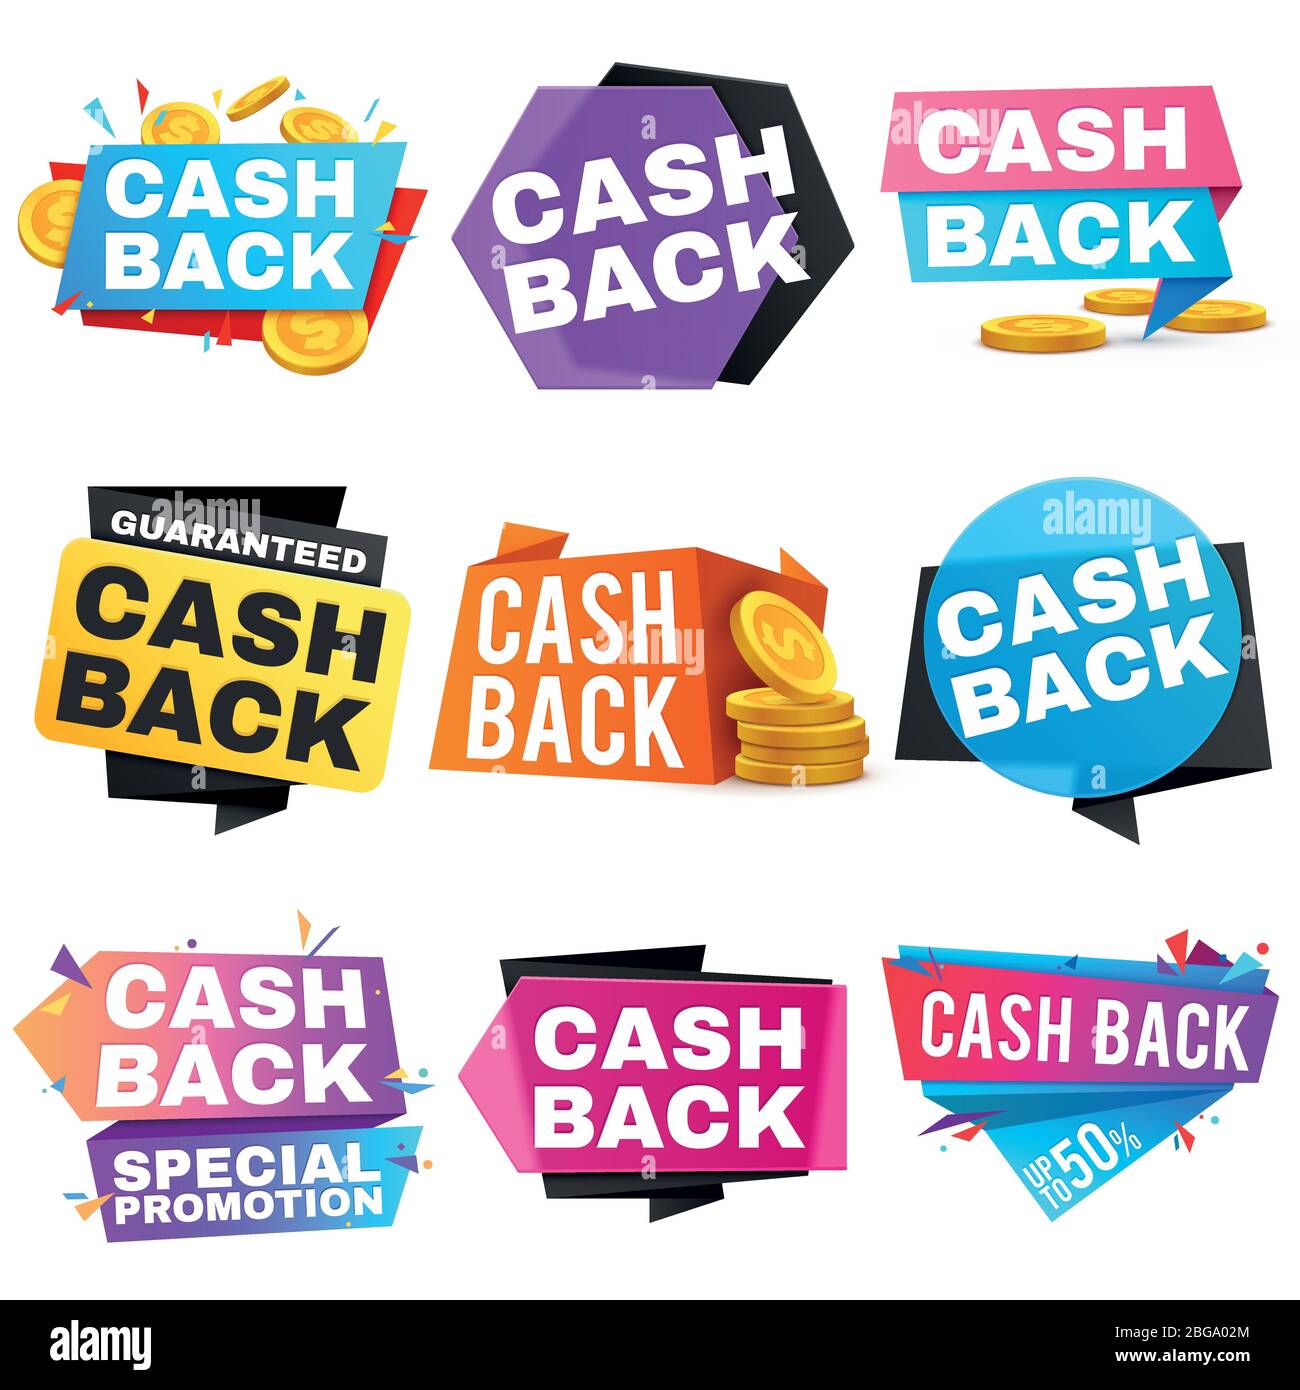 Cash back vector sale banners with ribbons. Saving and money refund icons. Cashback money badge and banner, business warranty illustration Stock Vector